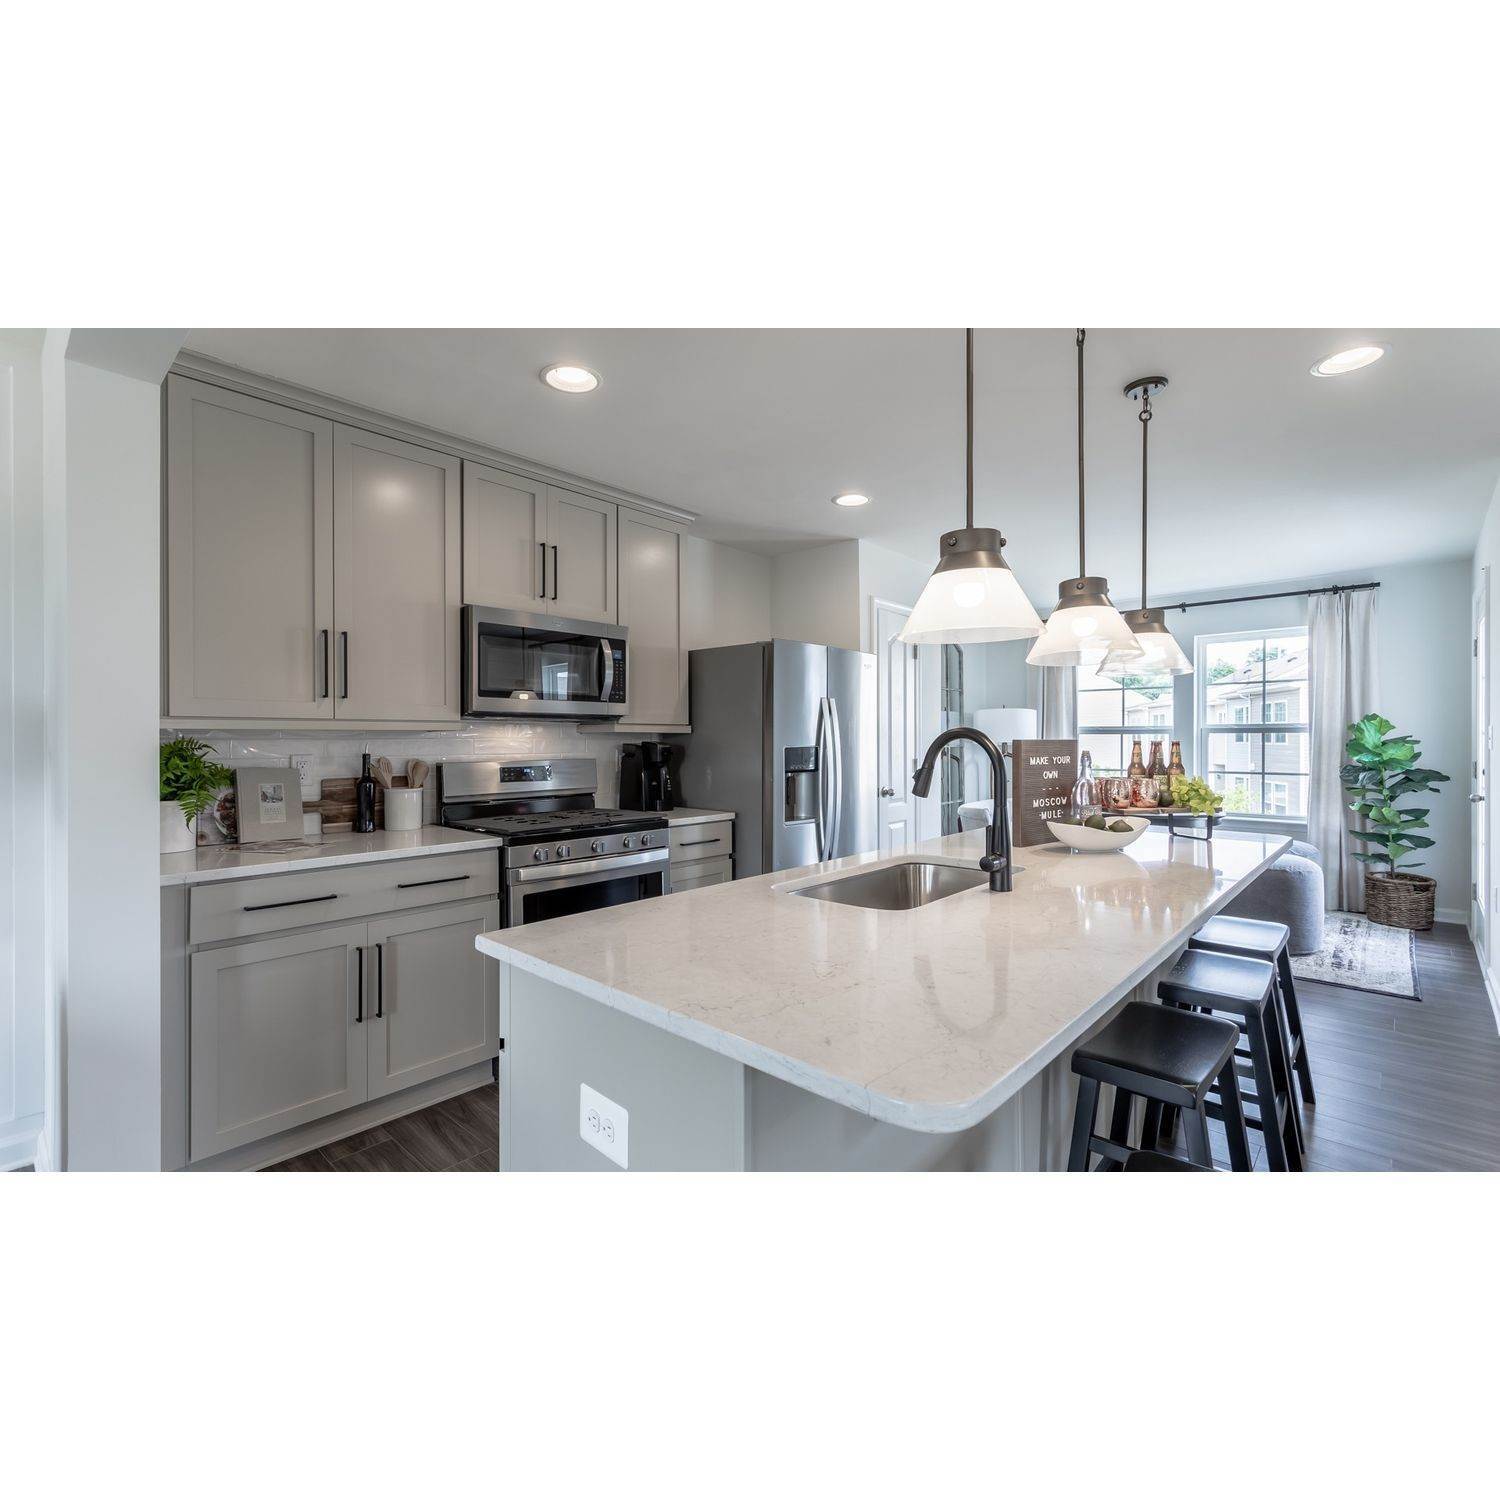 2. Archer's Rock Townhomes xây dựng tại 46 Capshaw Road, Martinsburg, WV 25403